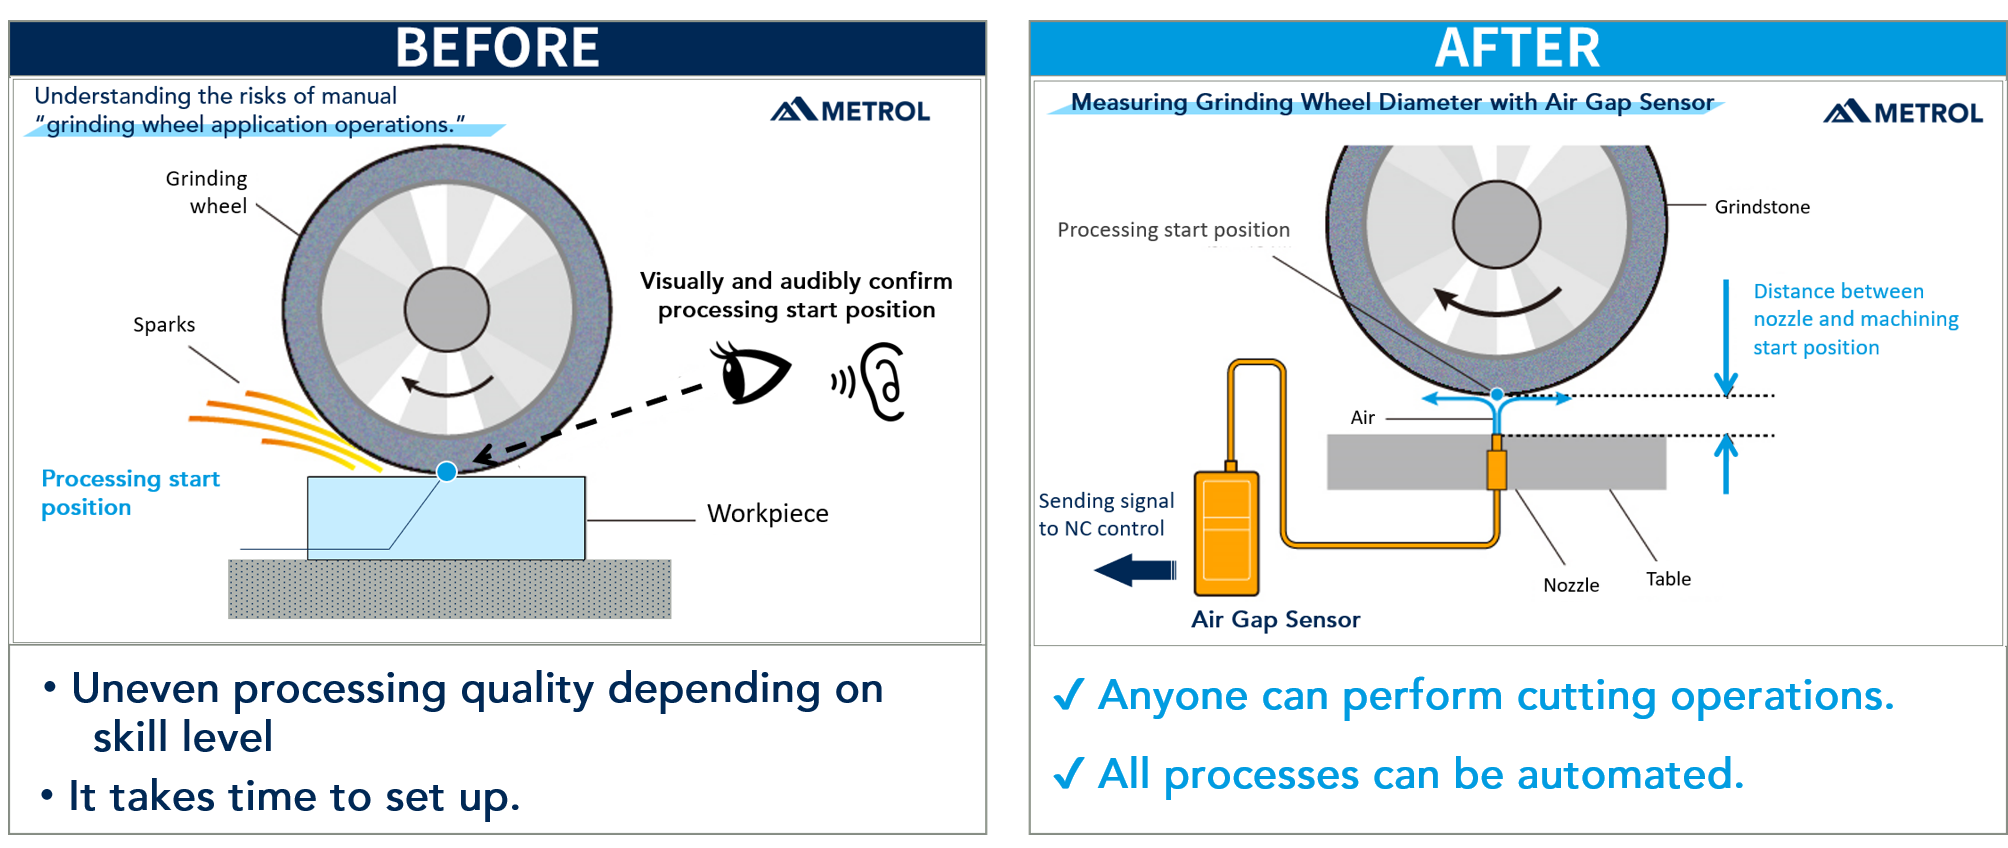 Grinding wheel application operations for CN Grinding Machine, Before and After.